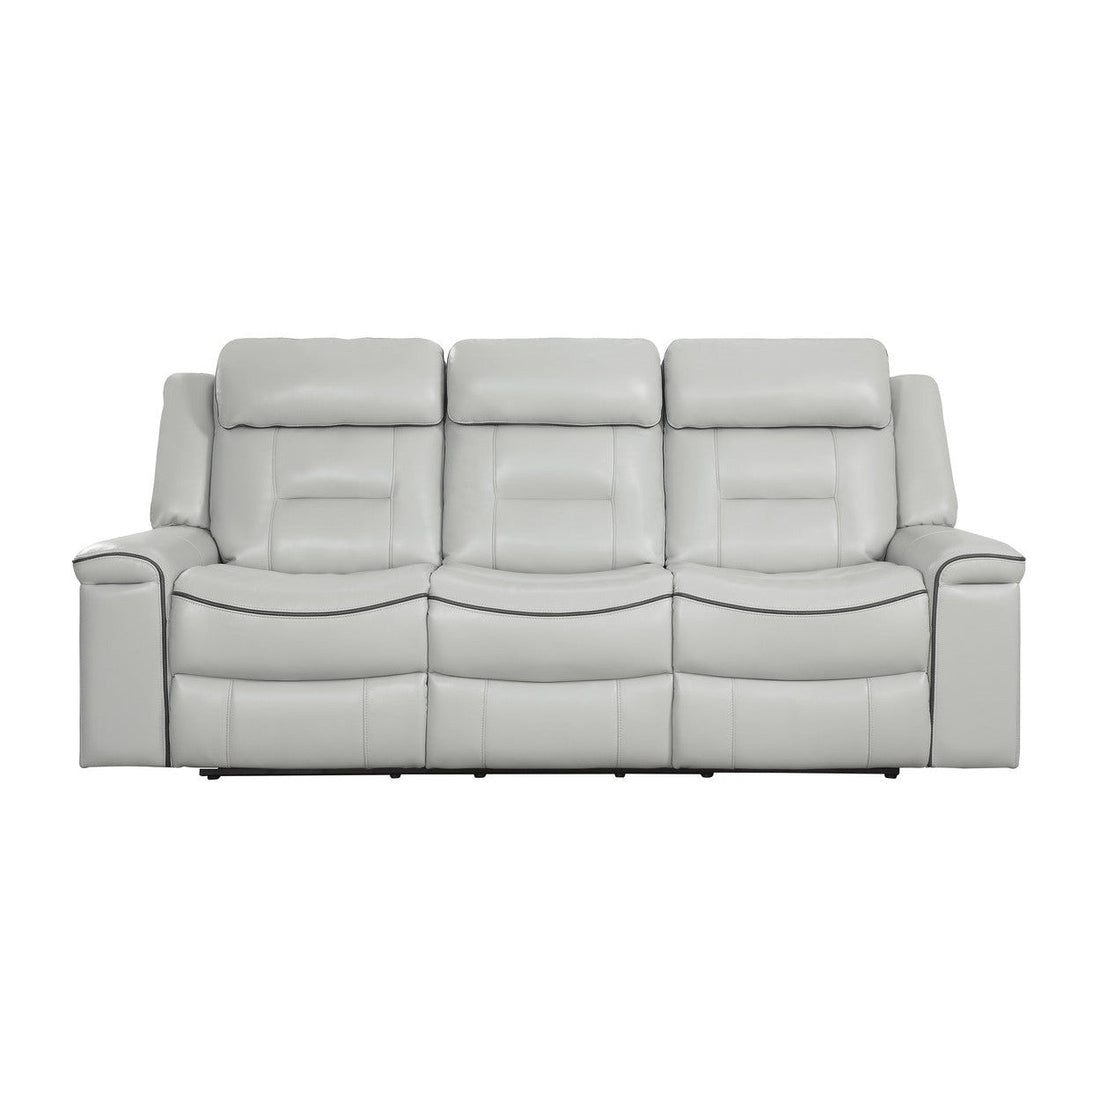 DOUBLE LAY FLAT RECLINING SOFA, LIGHT GRAY LEATHER GEL MATCH 9999GY-3